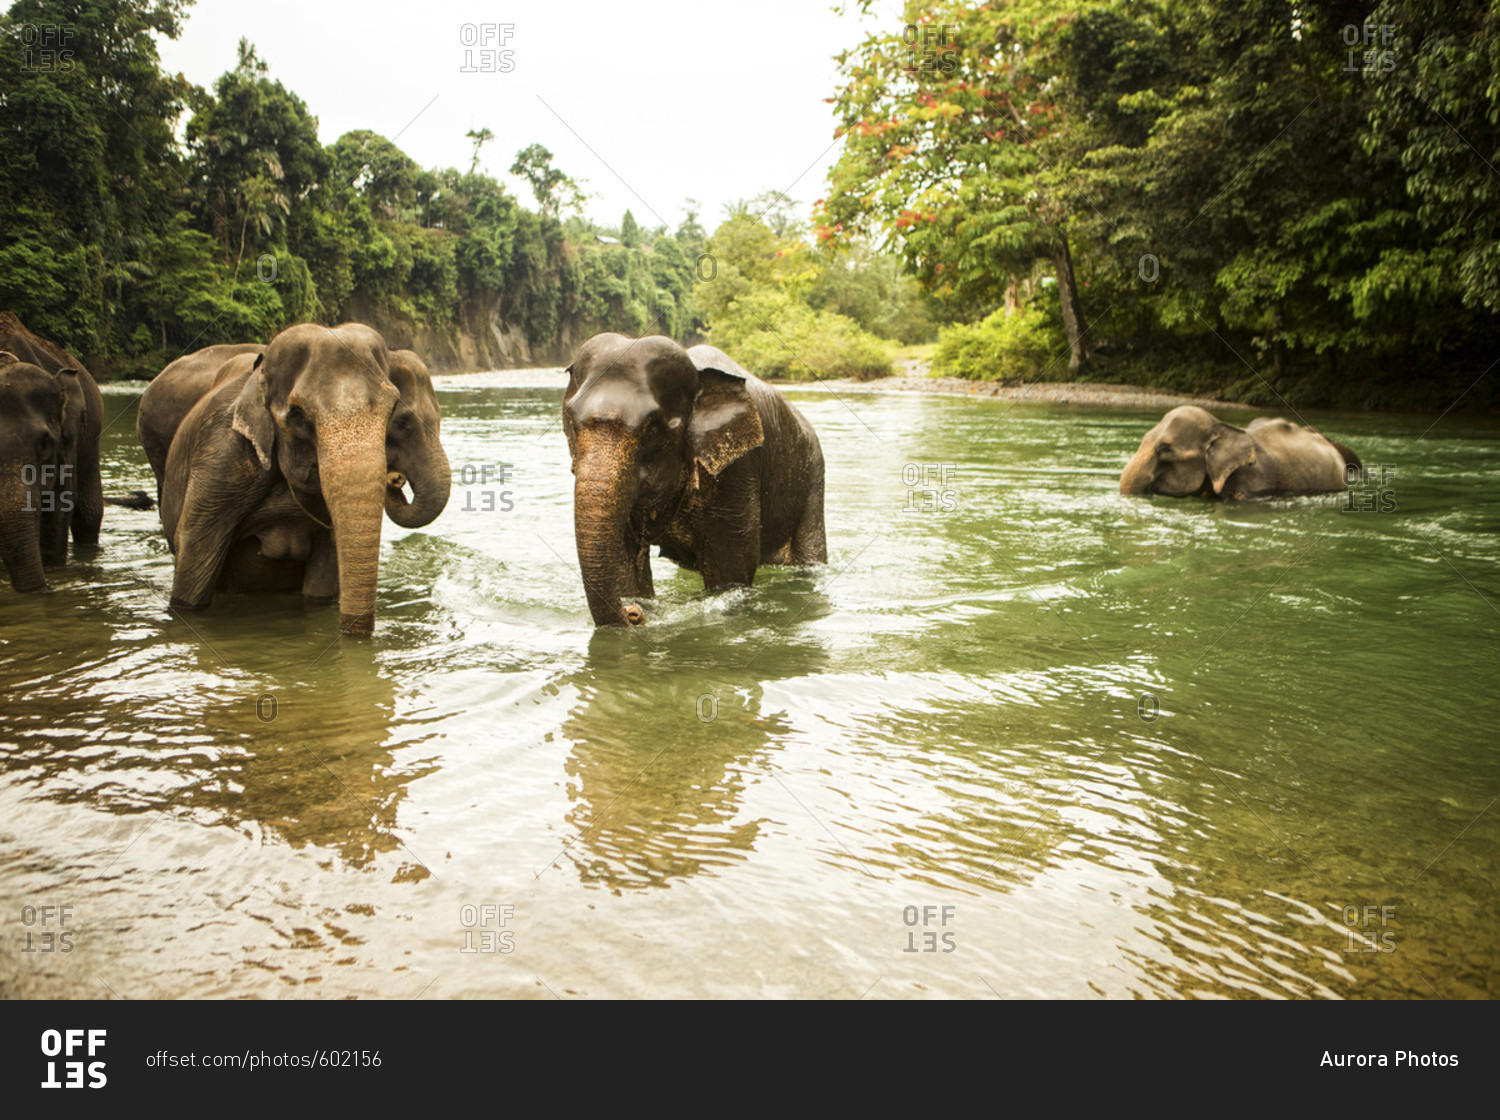 A family of Sumatran elephants bathe in a river in north Sumatra, Indonesia. Many of these elephants were rescued from being labor animals, but are still kept in less than ideal conditions.